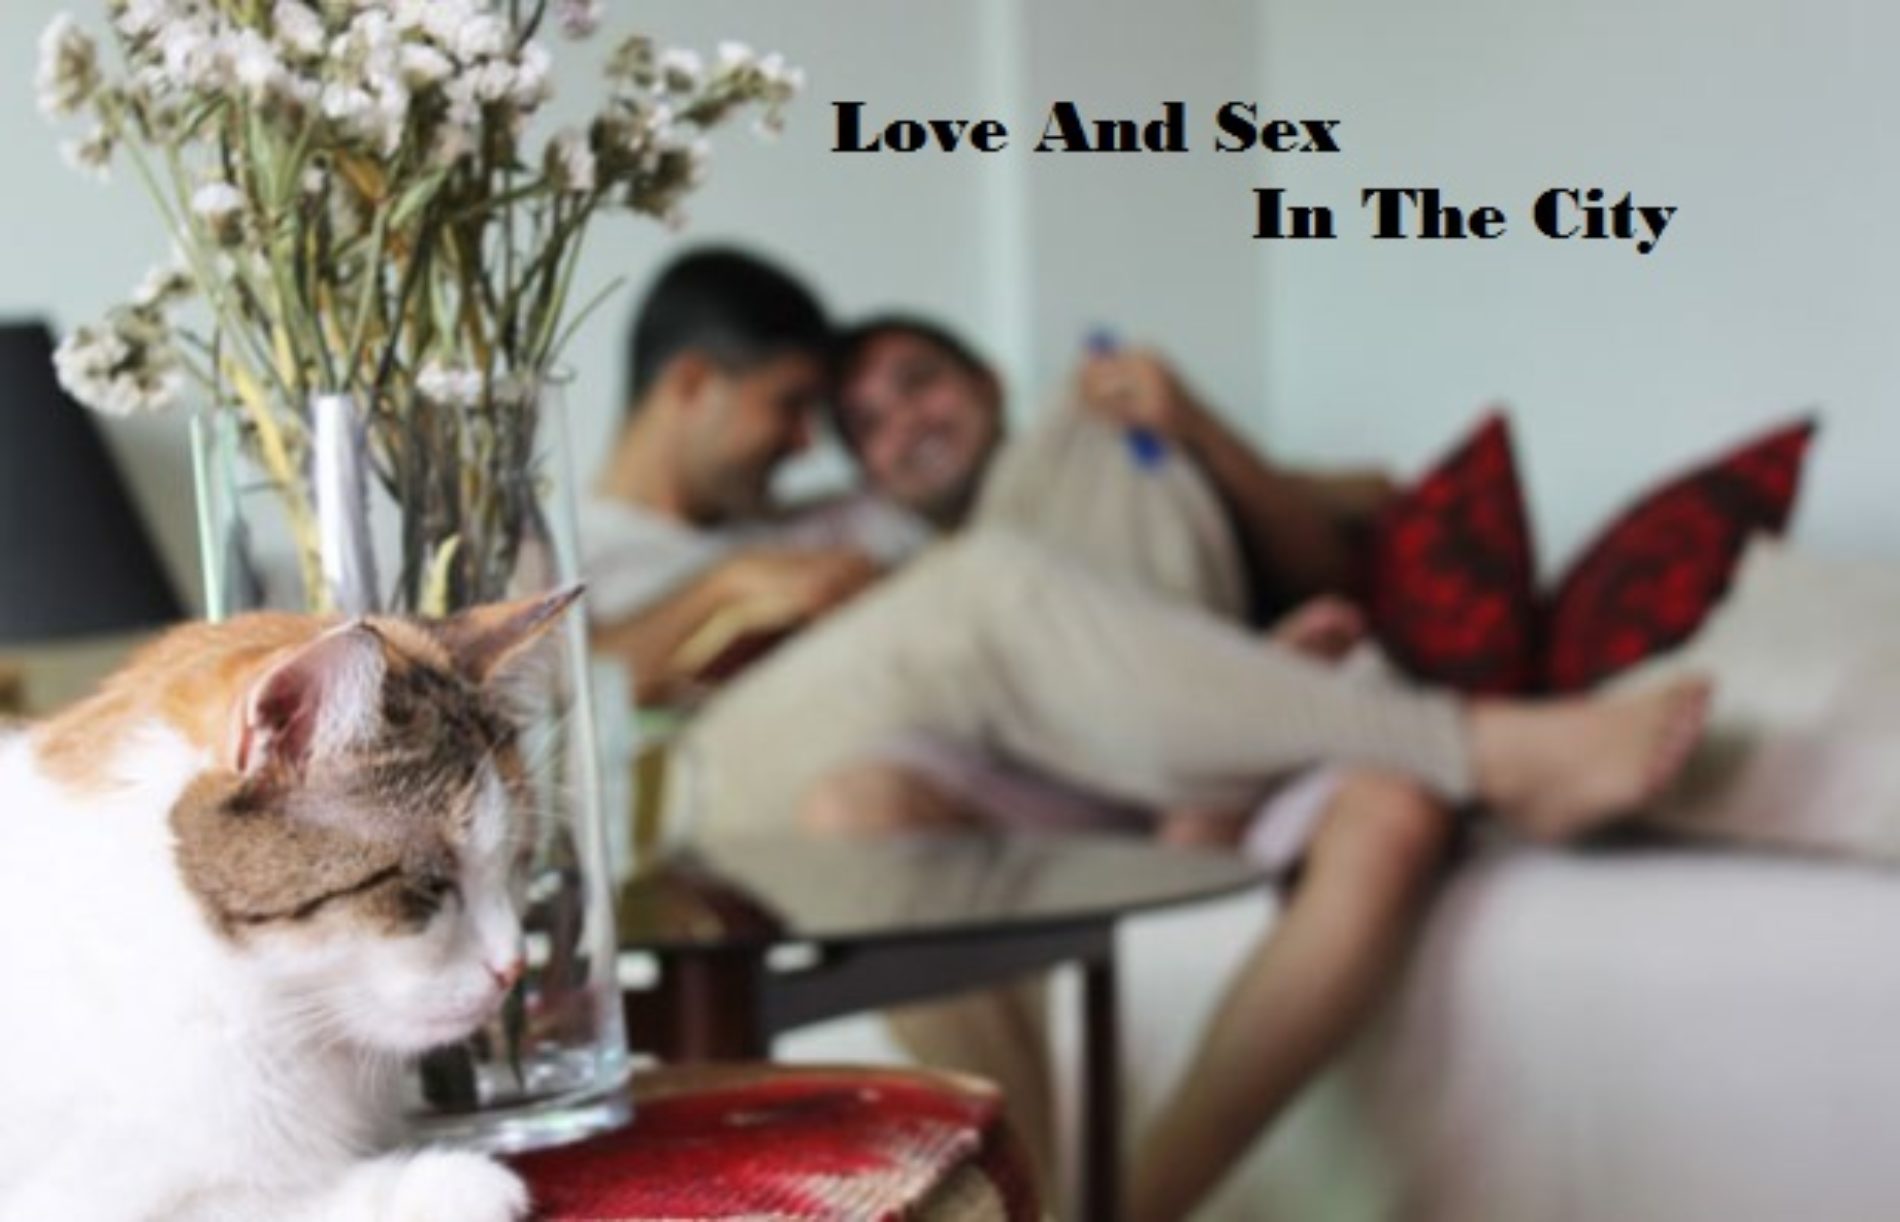 LOVE AND SEX IN THE CITY (Episode 36)